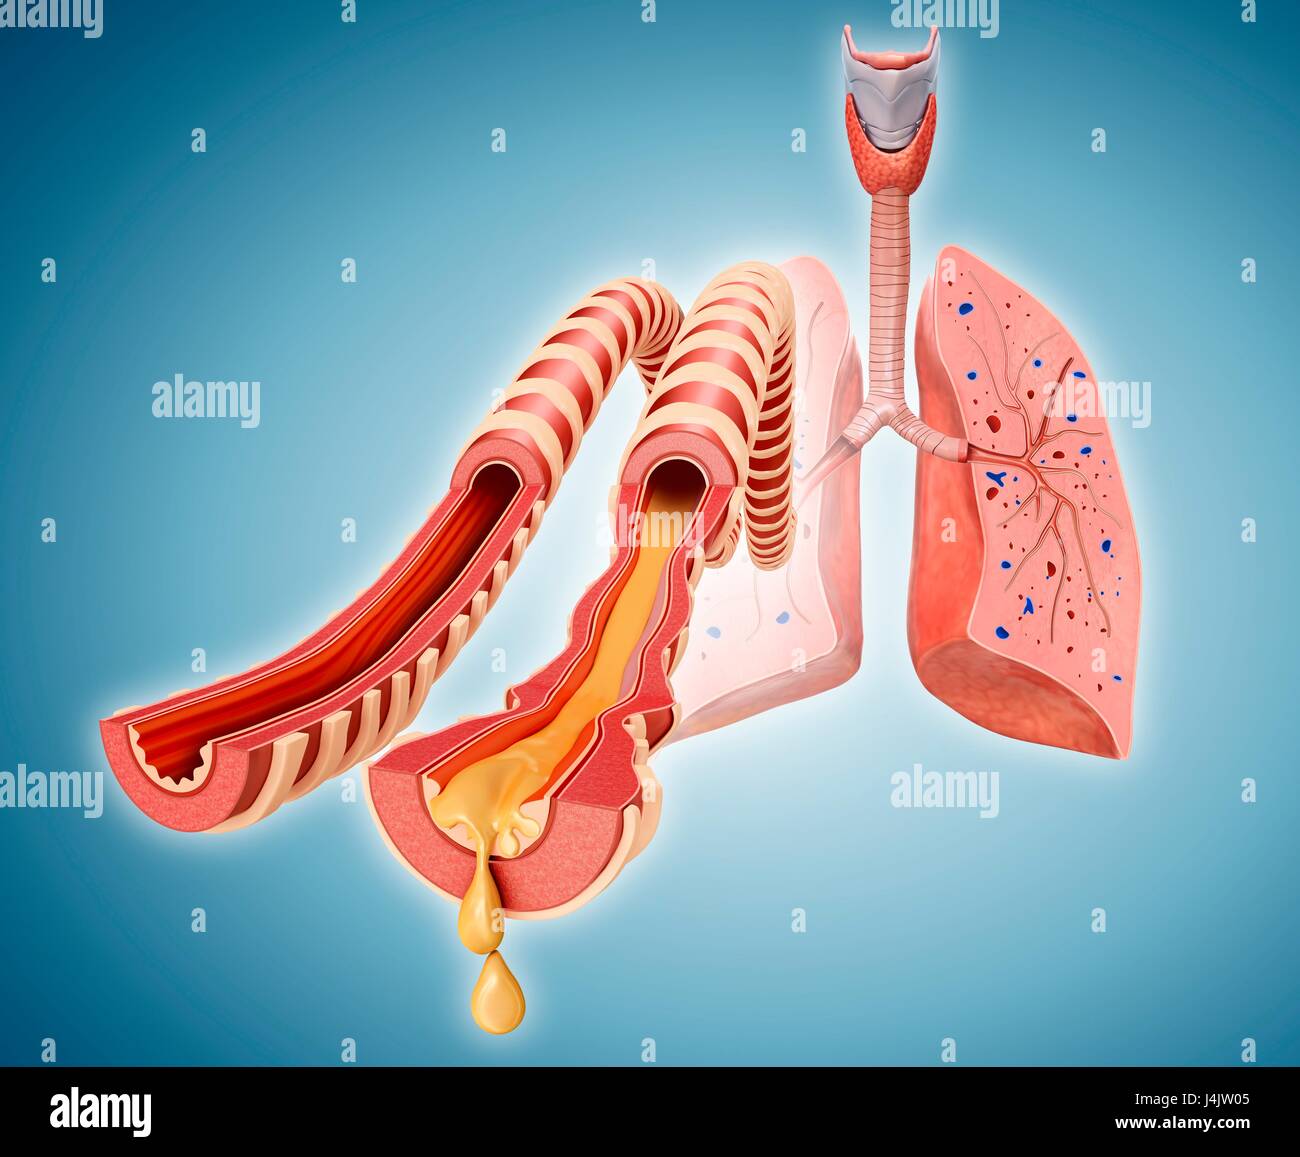 Illustration of normal and infected lung bronchi. Stock Photo